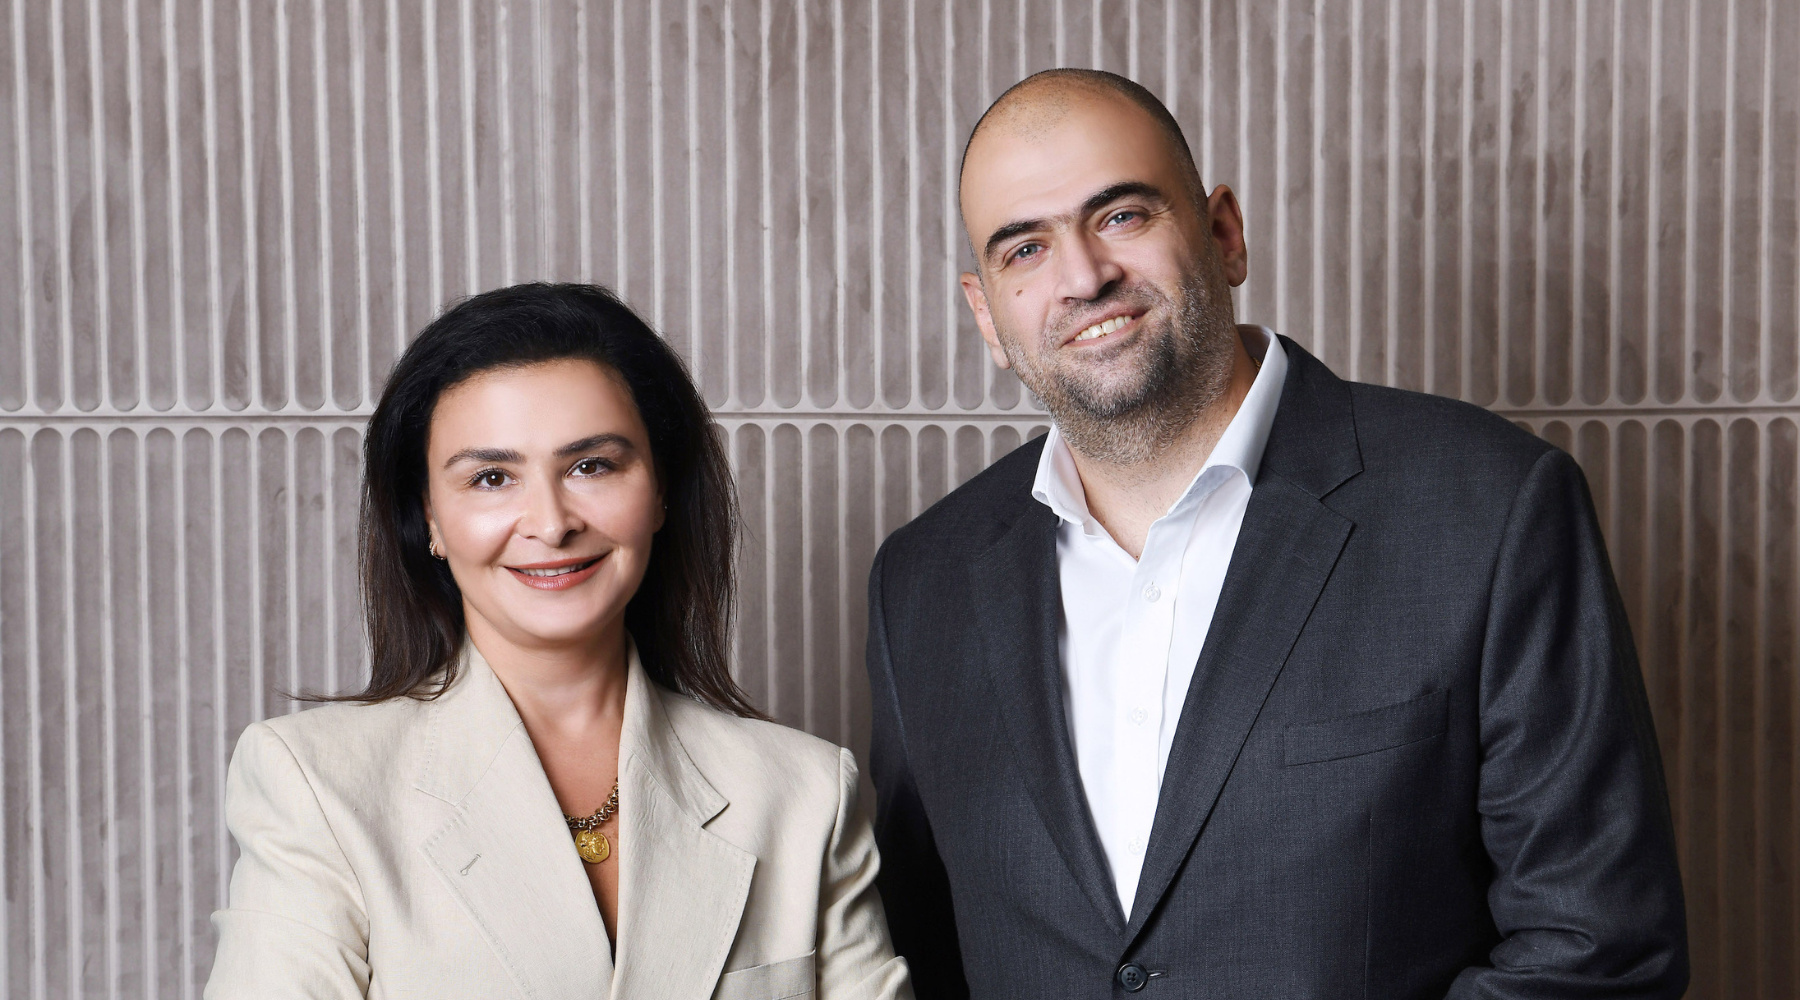 Z7 Communications To Represent Infiniti Across The Middle East